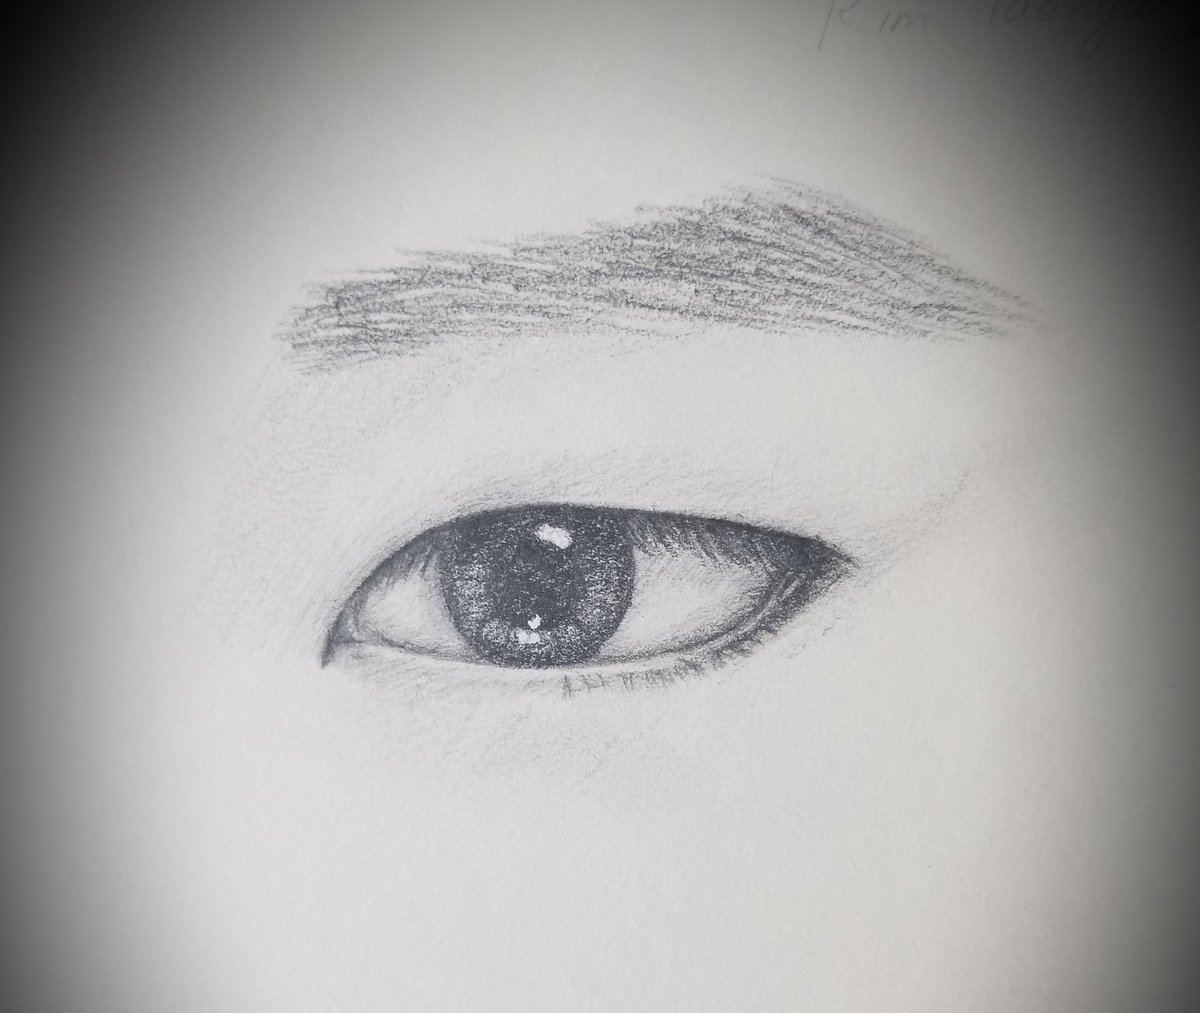 So I've been meaning to practice how to draw people. I'm starting off with the eyes cause for me it's the most interesting facial feature (please ignore the eyebrows for now) so what better way to practice than drawing the people that inspire me  @BTS_twt